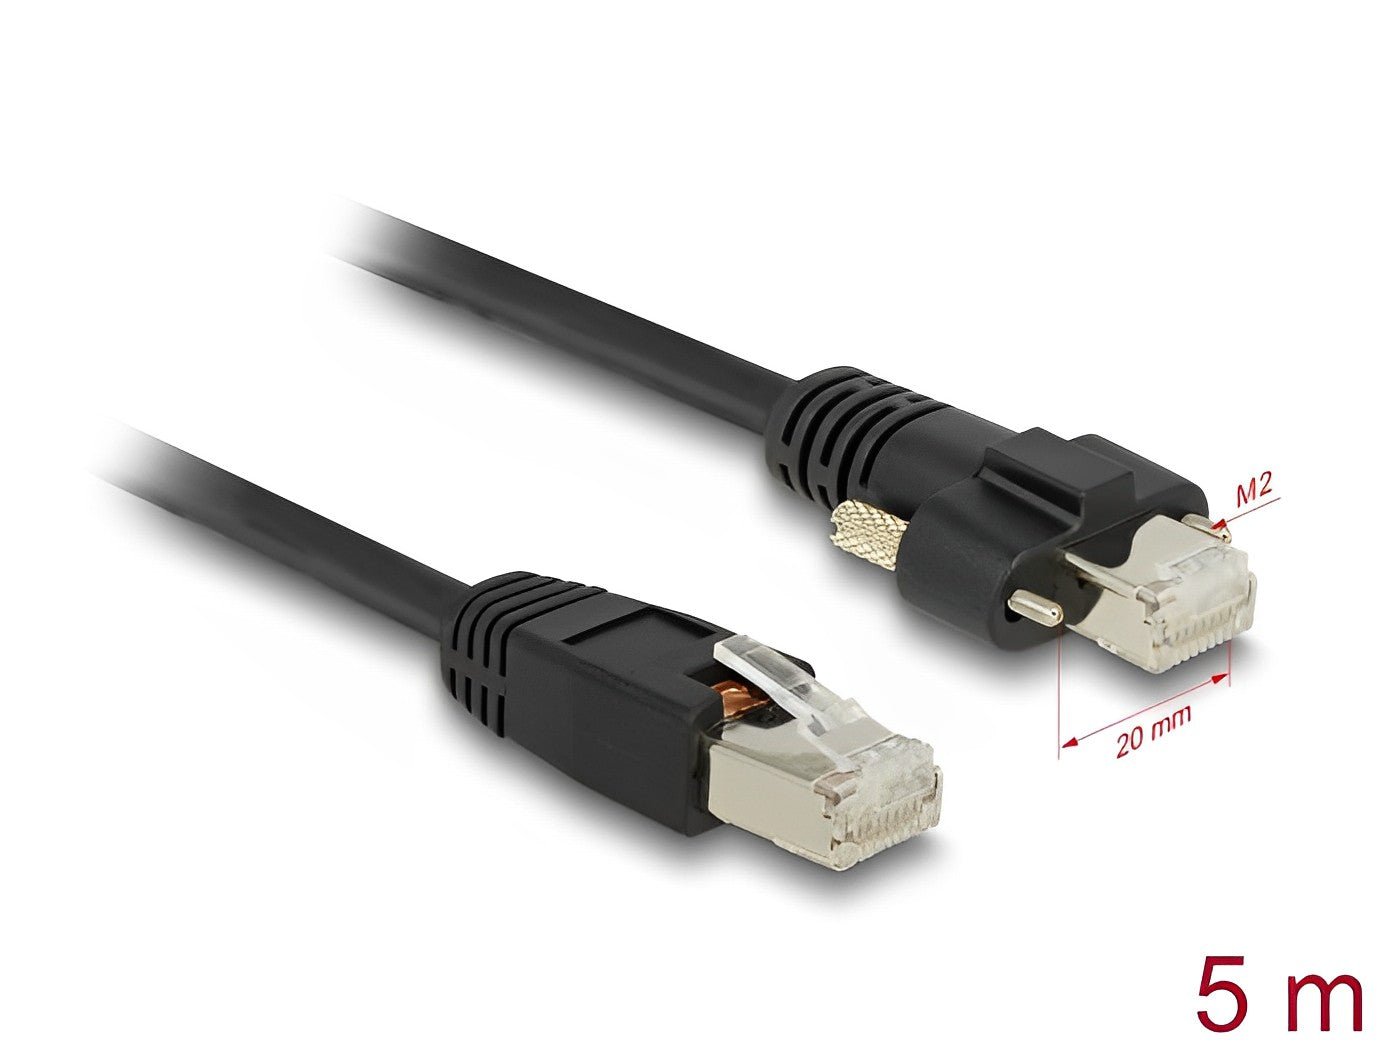 Delock Cable RJ45 plug to RJ45 plug with screw distance 20 mm for GigE Camera Cat.6A S/FTP 5 m black - delock.israel